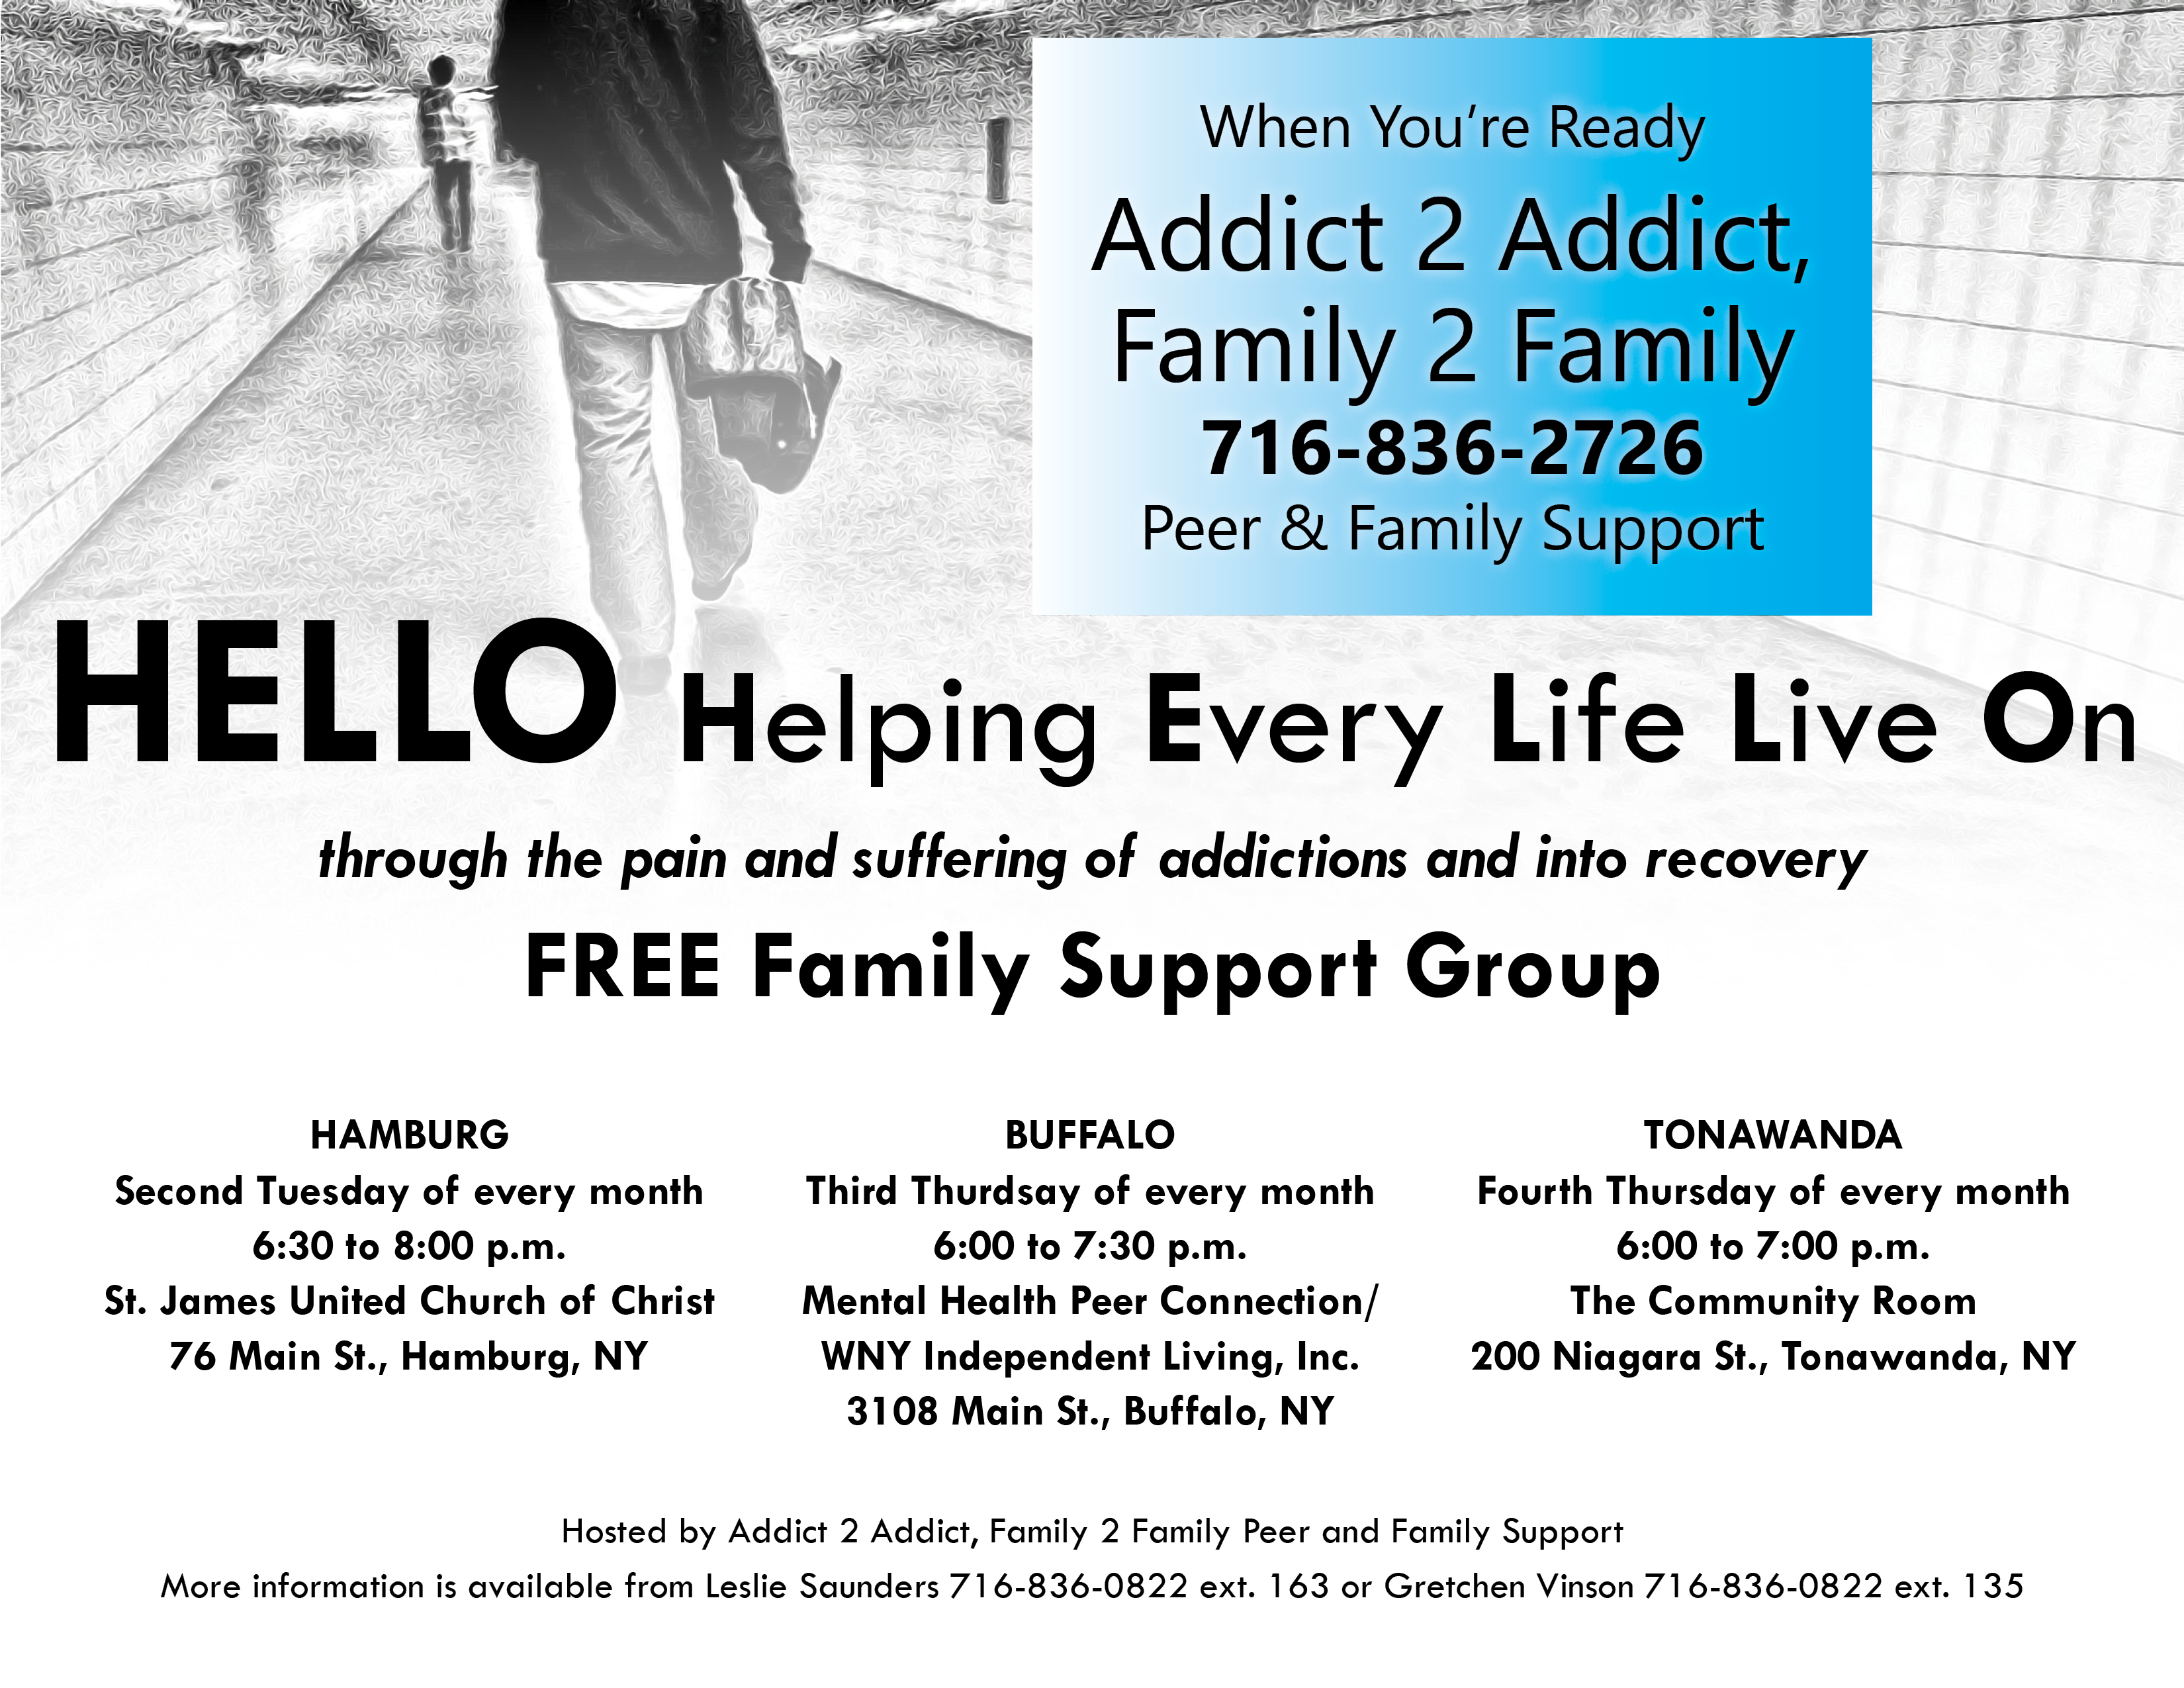 HELLO Family Support Group